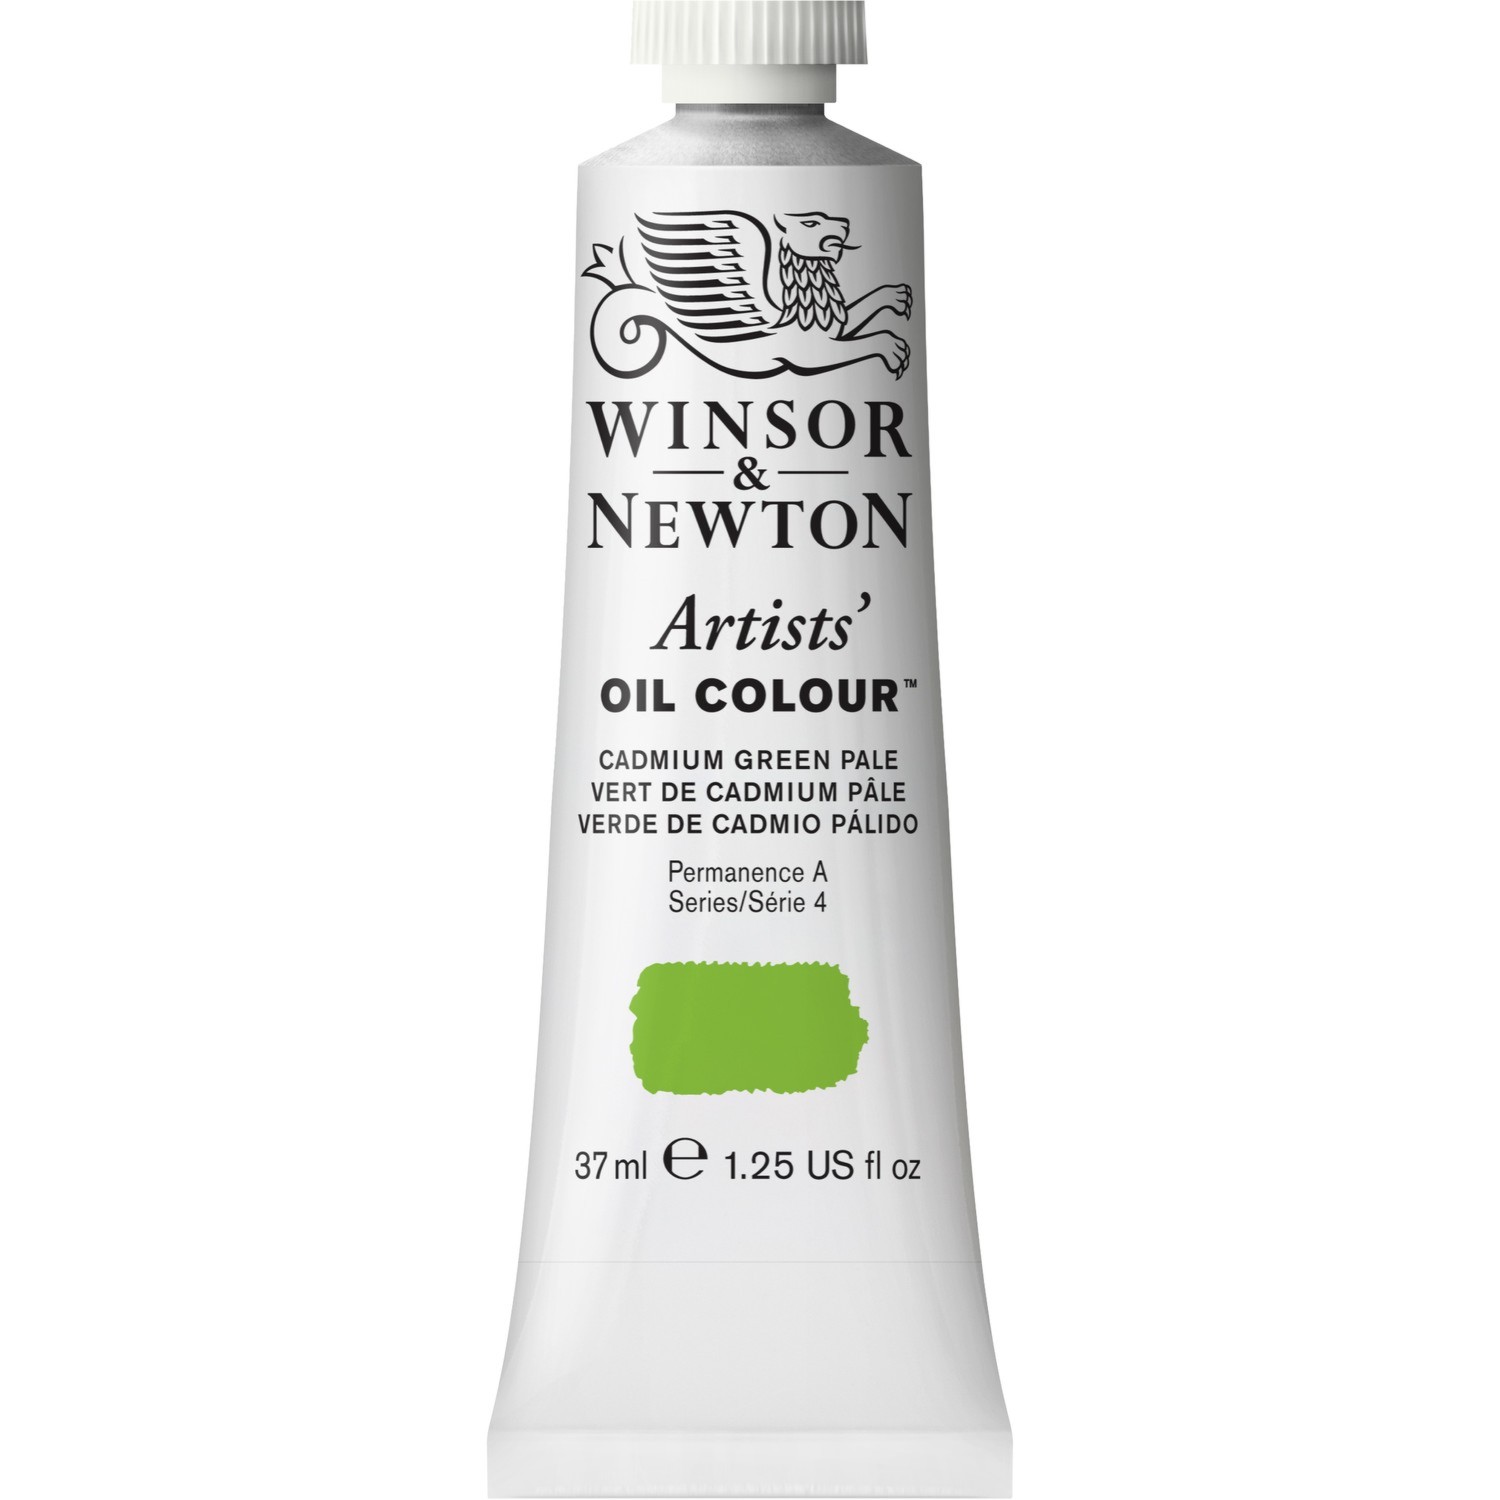 Winsor and Newton 37ml Artists' Oil Colours - Cadmium Green Pale Image 1